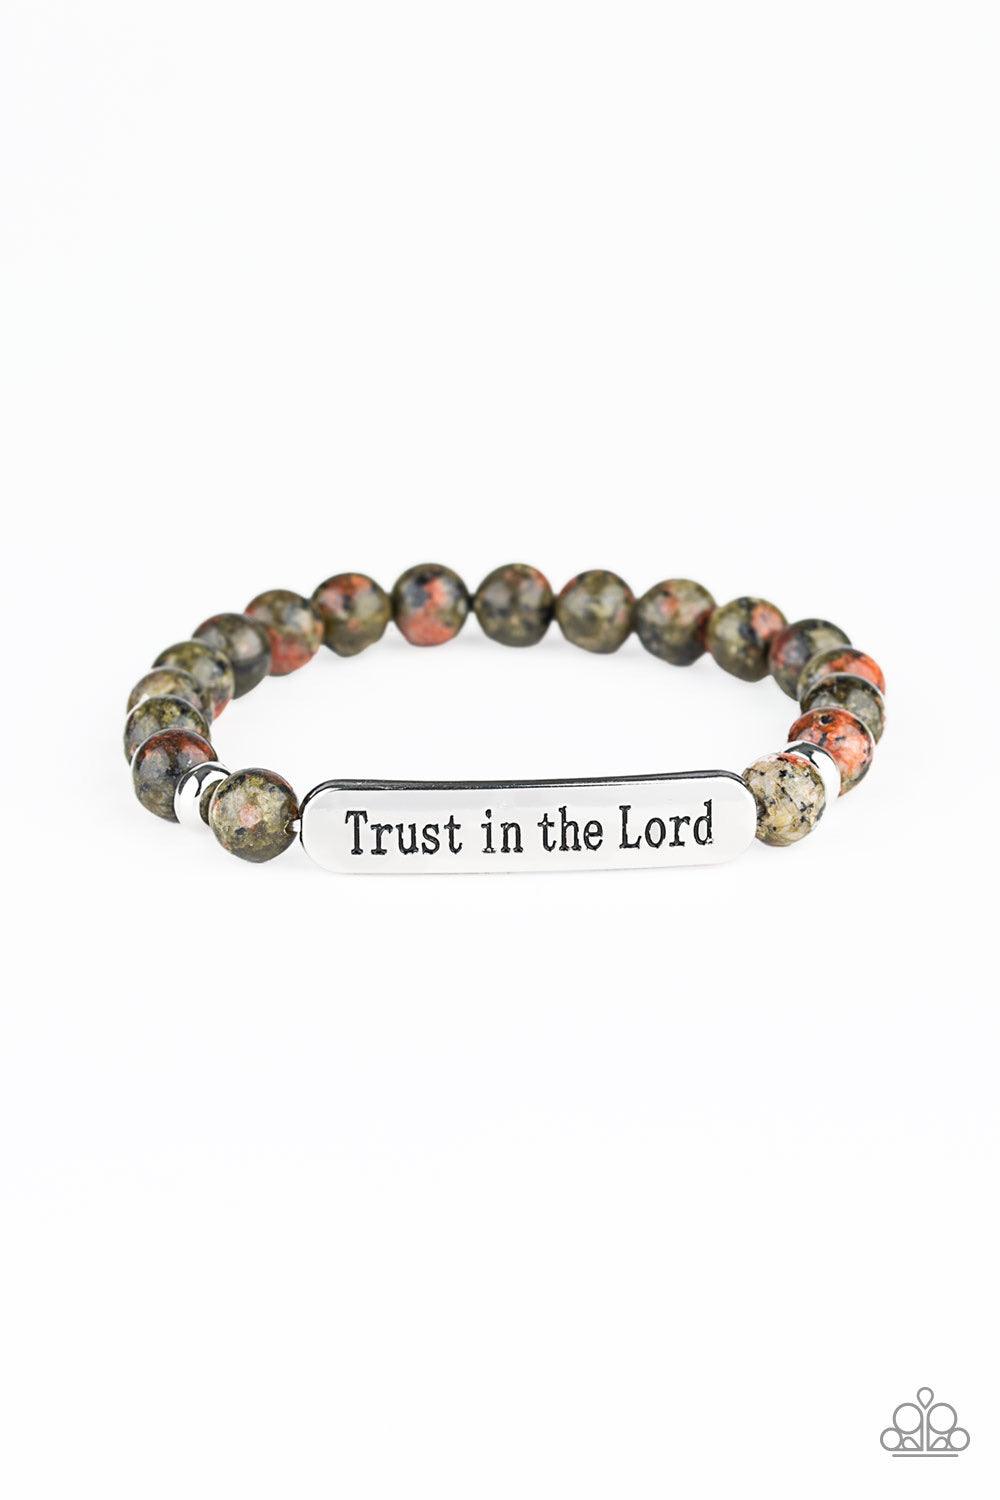 Paparazzi Accessories Trust Always - Multi Infused with dainty silver accents, a collection of glassy stone beads and a shimmery silver frame stamped in the phrase, "Trust in the Lord", are threaded along a stretchy band around the wrist for an inspiratio